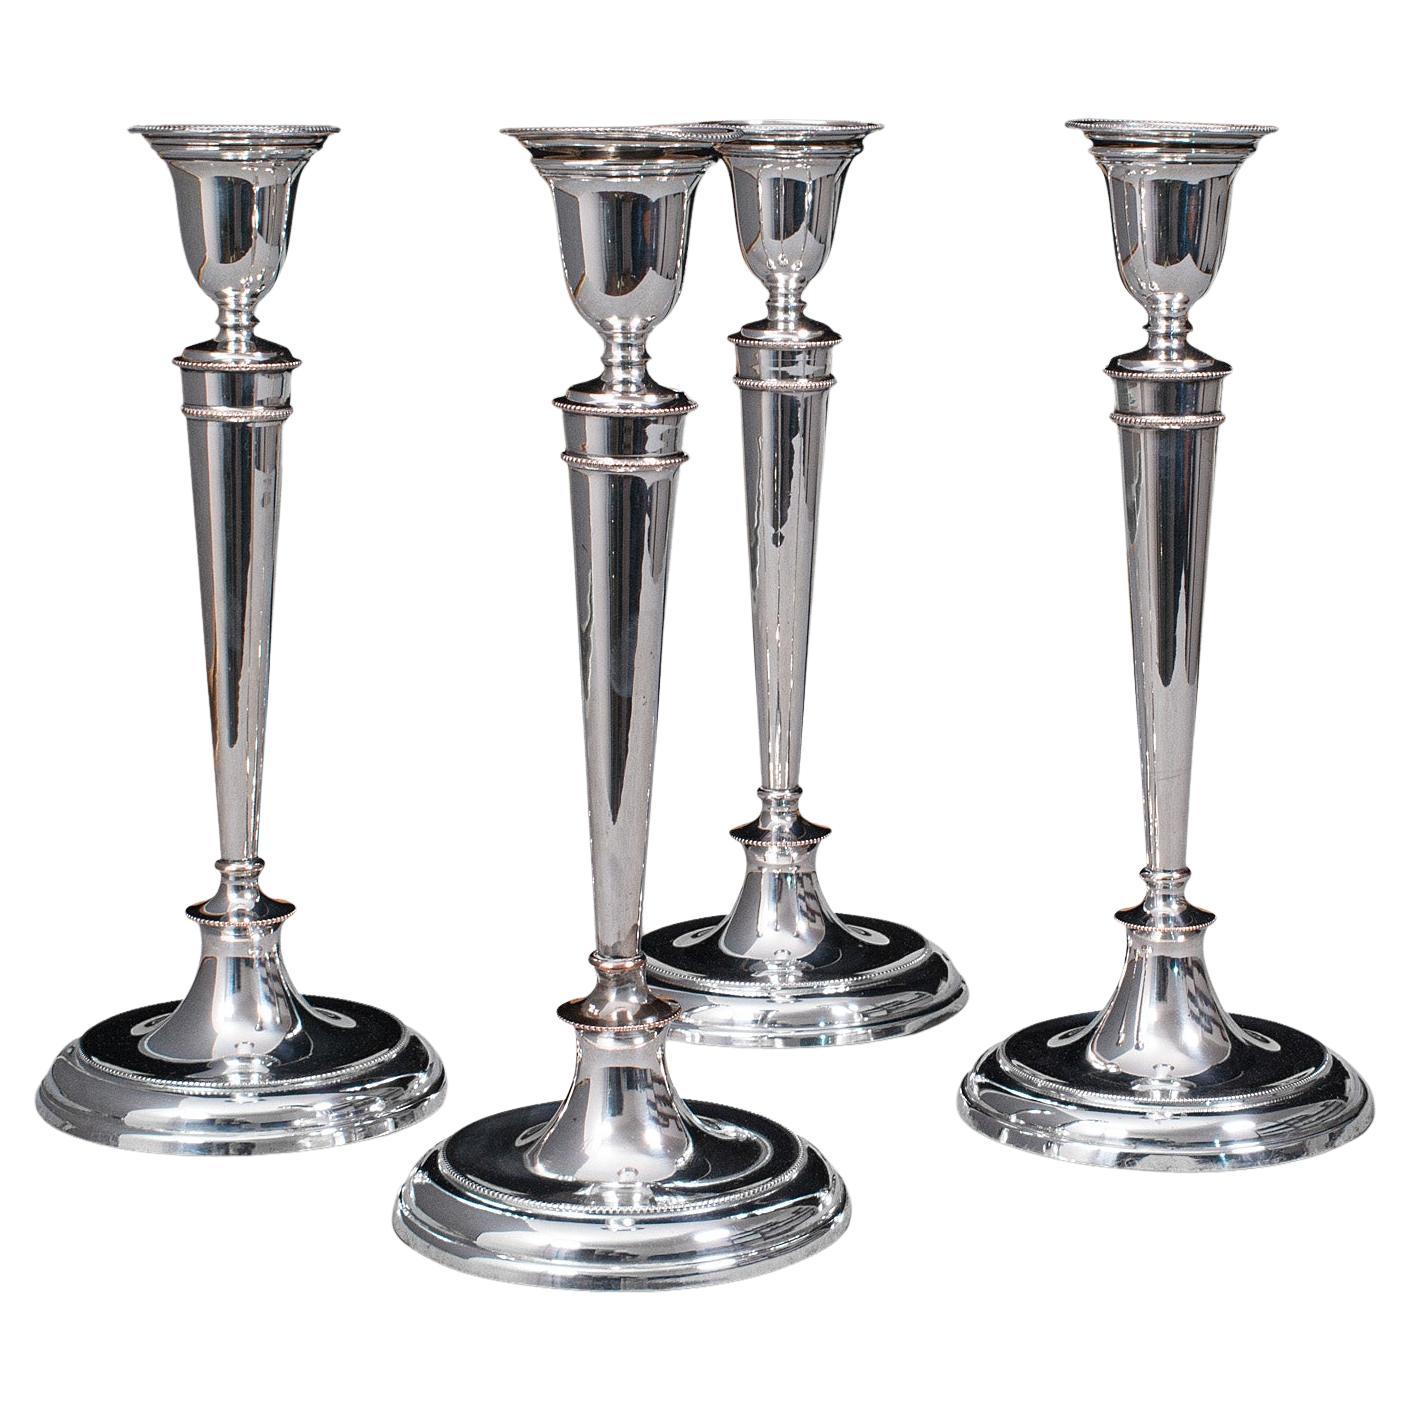 Set of 4 Antique Candlesticks, English, Silver Plate, Candle Sconce, Victorian For Sale